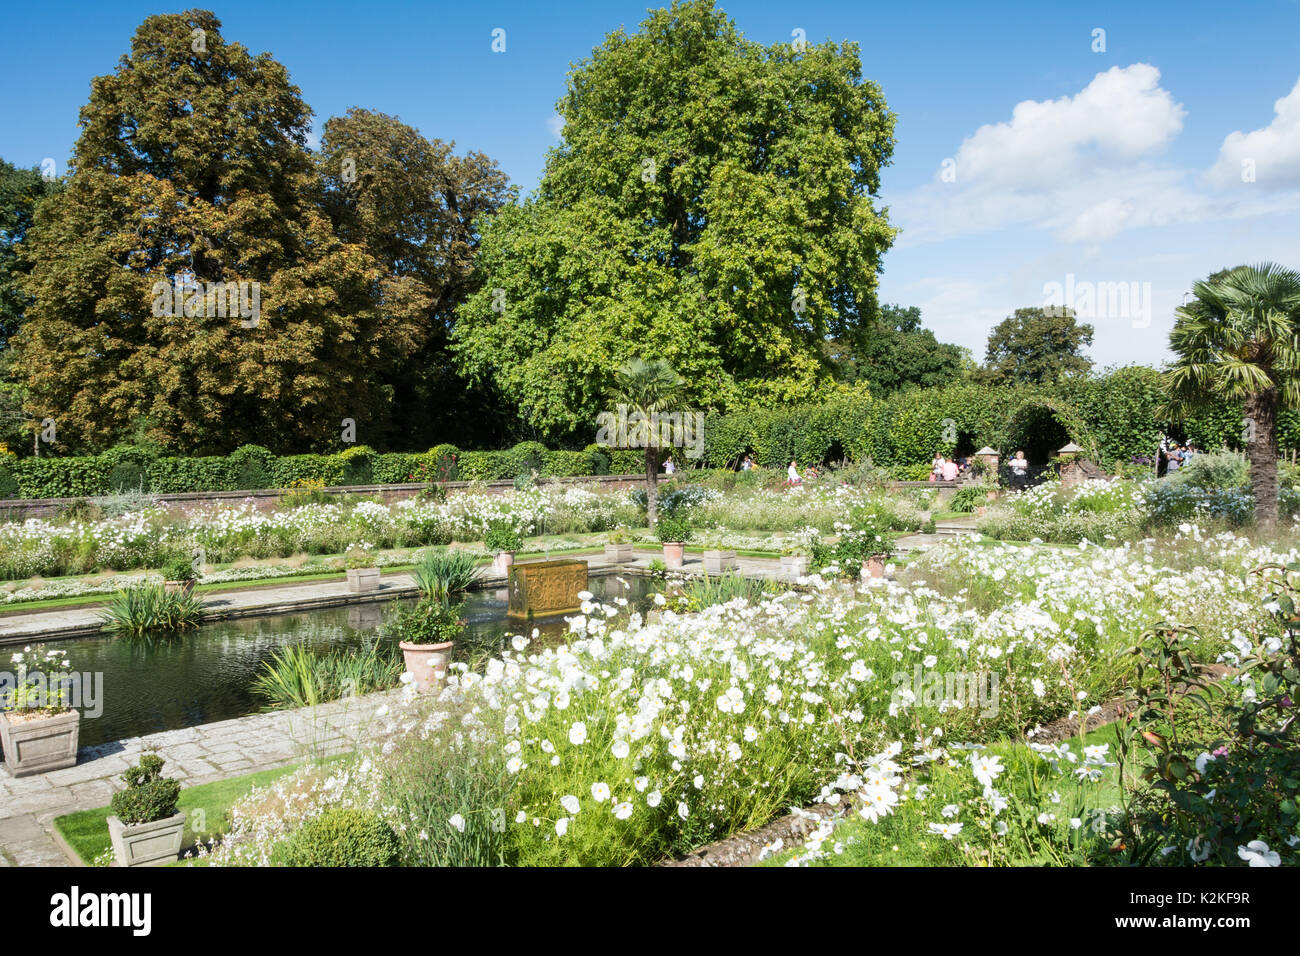 London, UK. 31st Aug, 2017. Well wishers visit the White Garden at Kensington Palace to commemorate and pay tribute to Princess Diana, twenty years after her death. Credit: Benjamin John/Alamy Live News Stock Photo